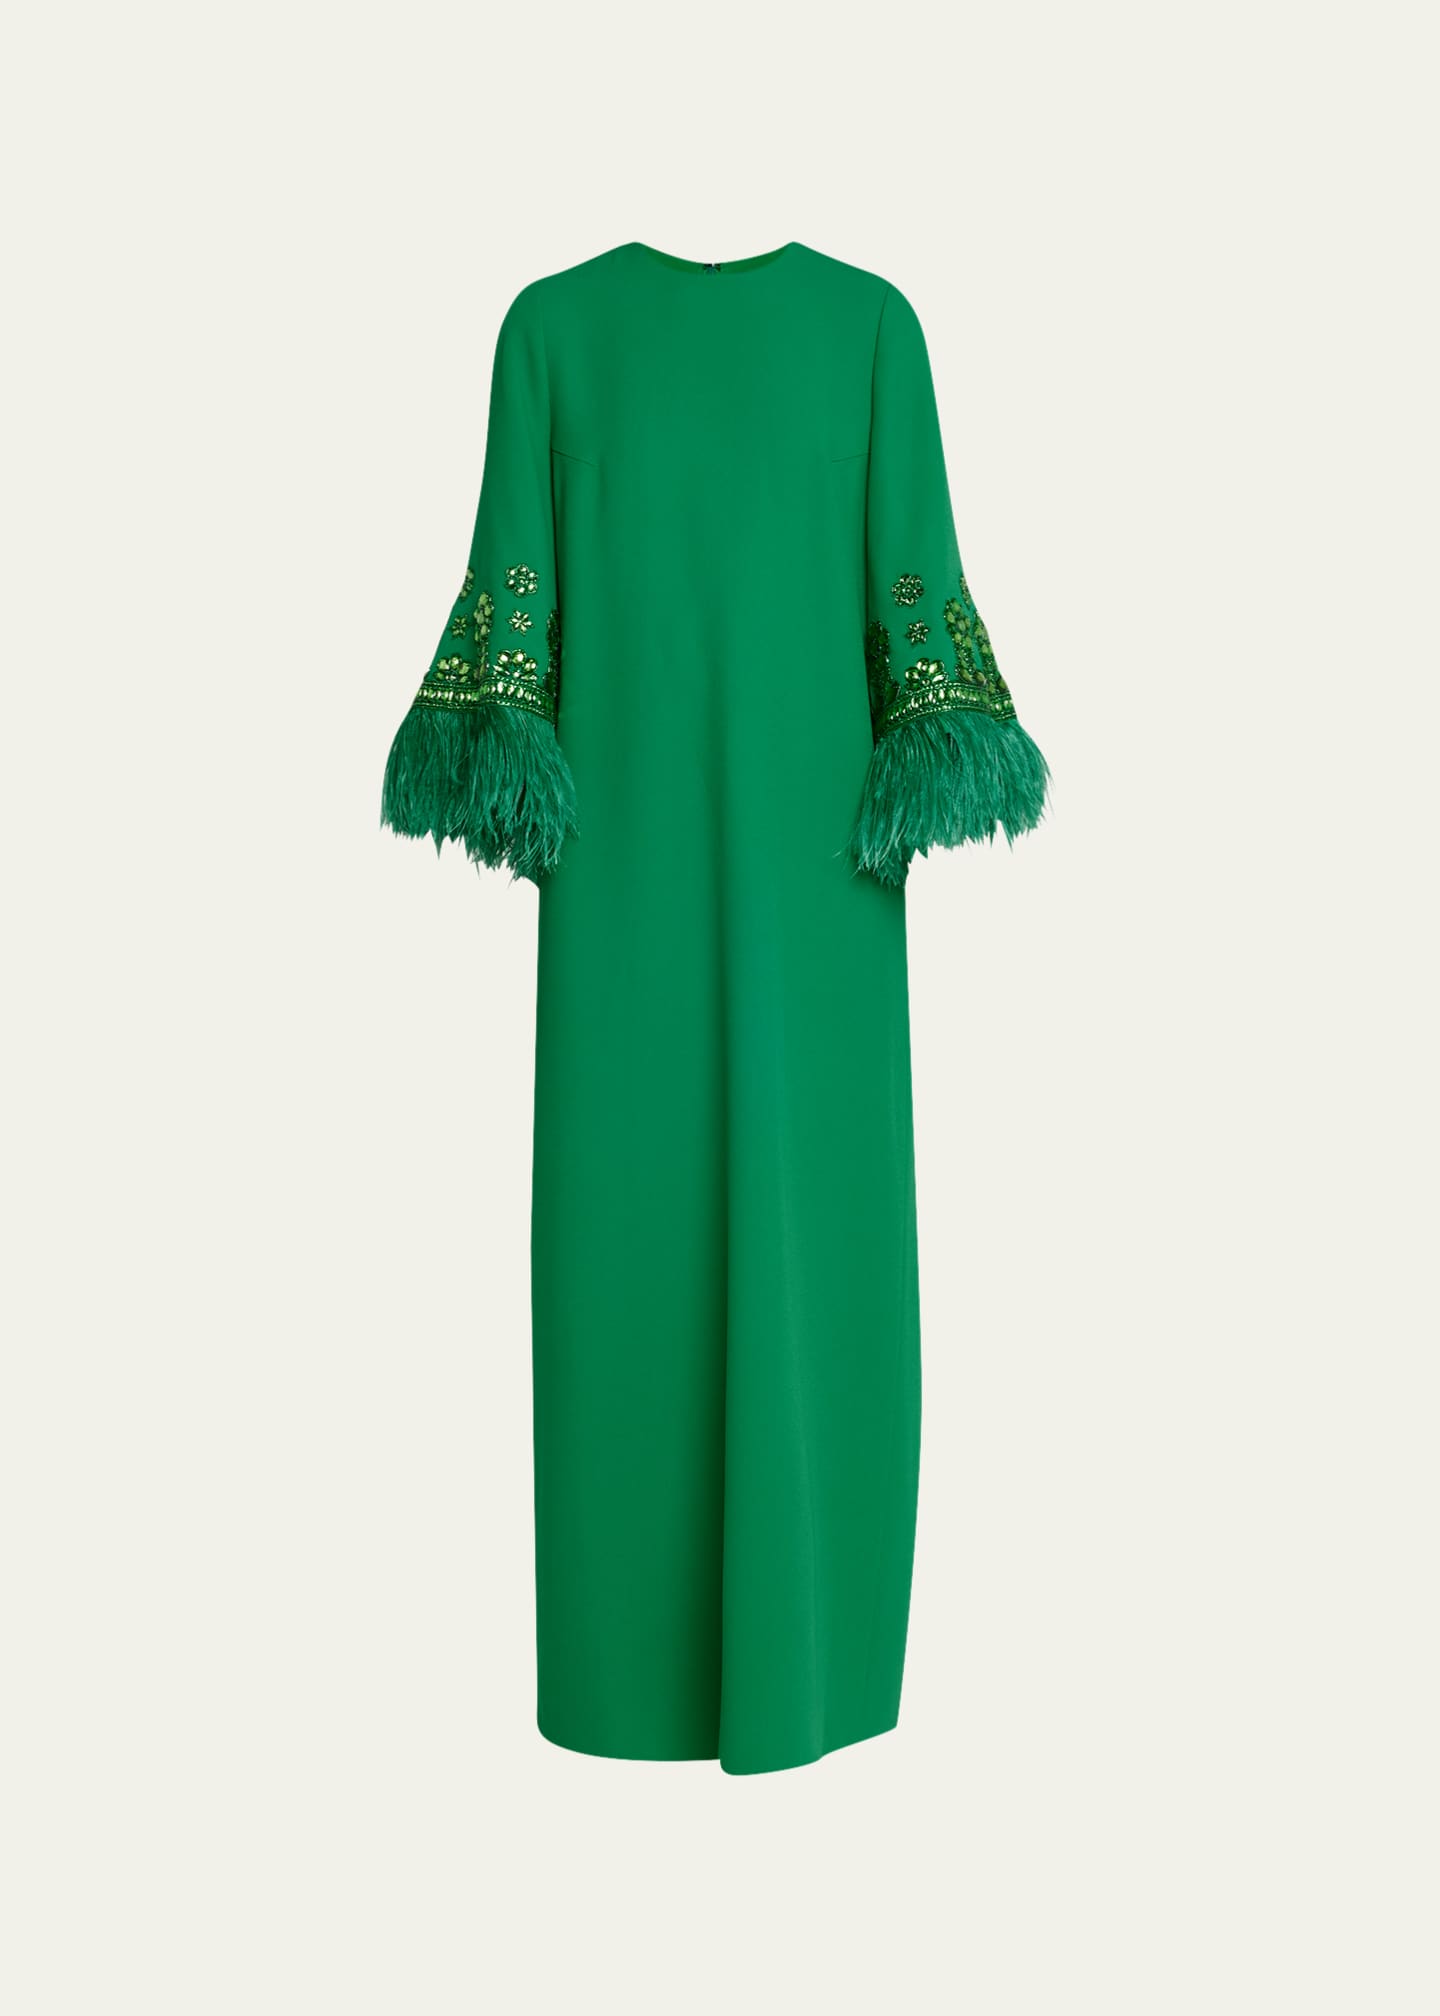 Andrew Gn Feather Crystal Trim Midi Dress Image 1 of 5